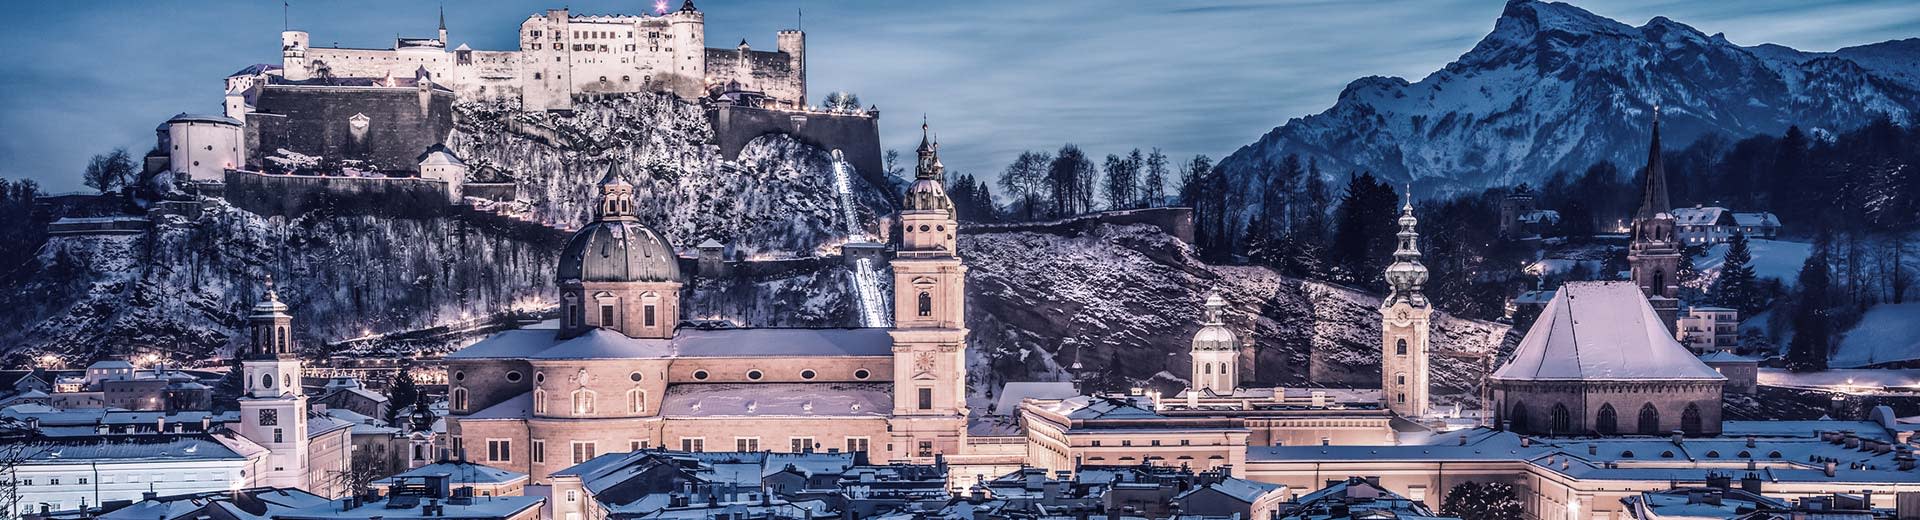 Salzburg Castle lights up the night sky in the background, while historic buildings are visible to the fore.